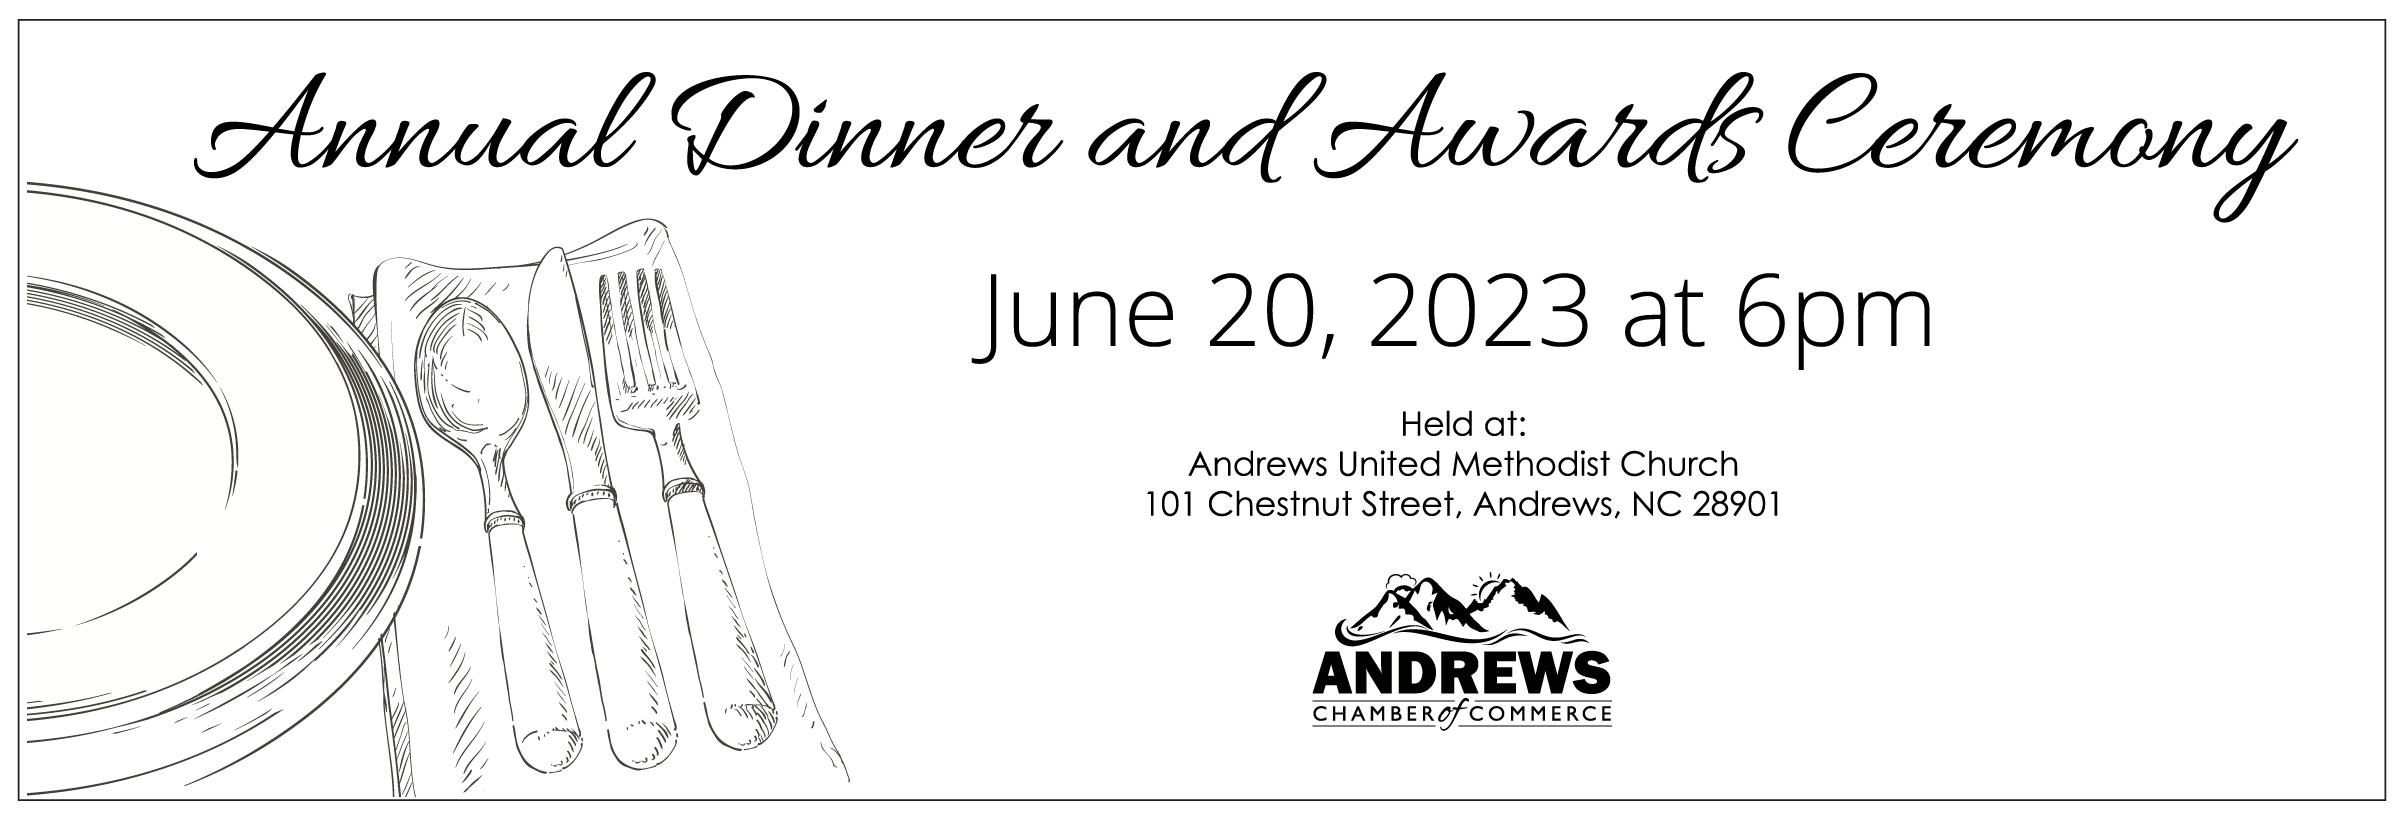 2023 Annual Chamber Dinner Tickets